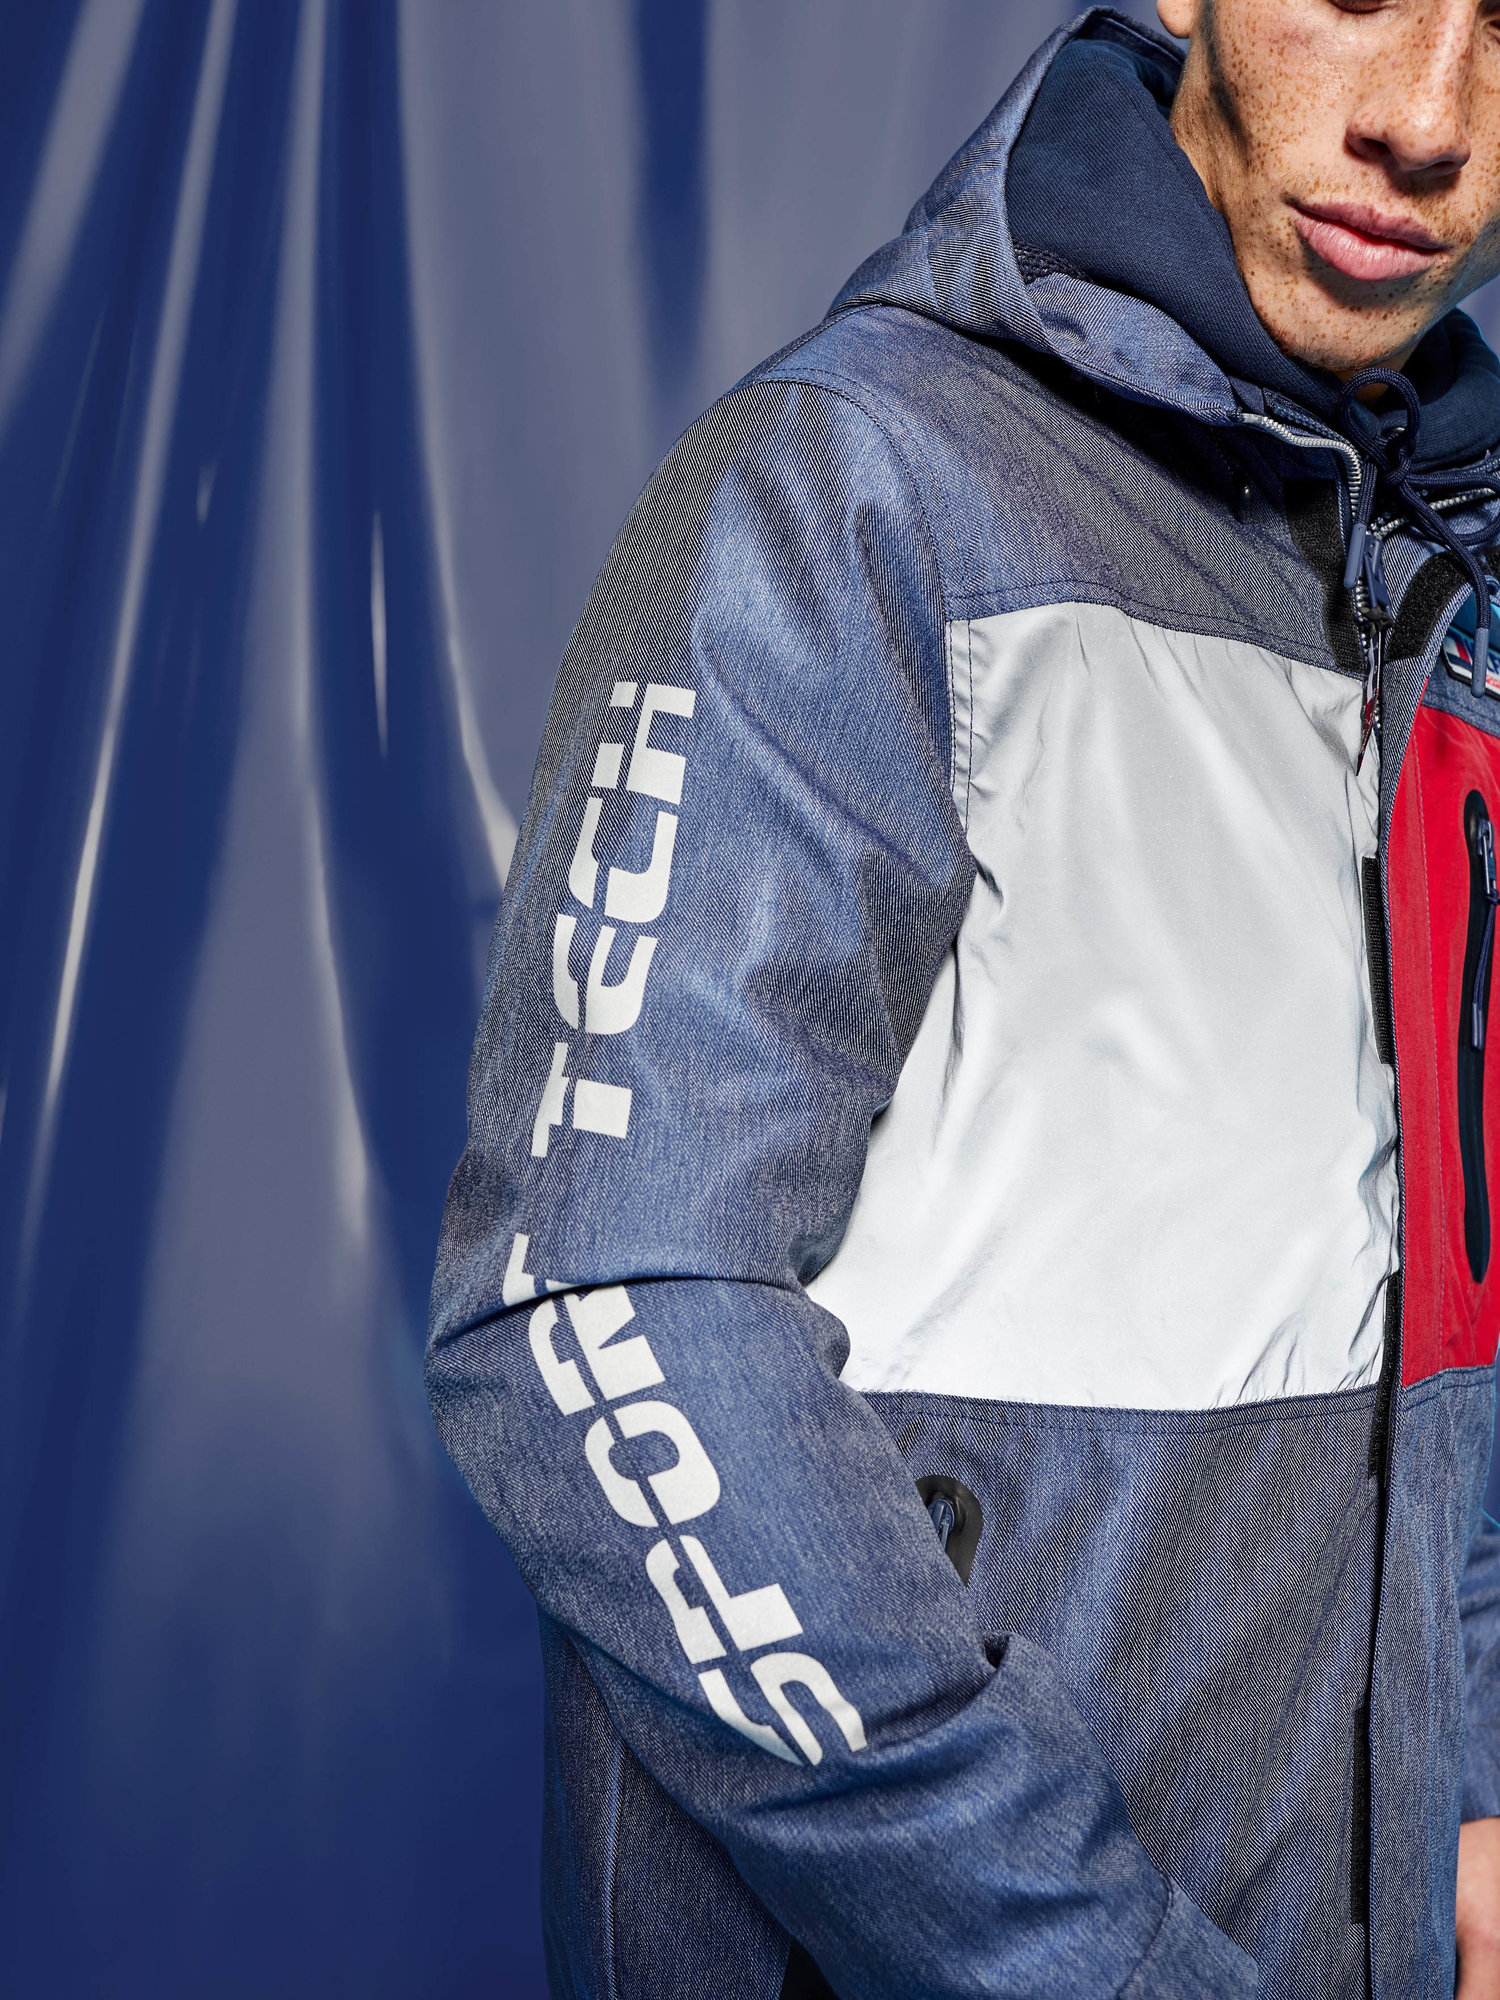 tommy hilfiger sport collection